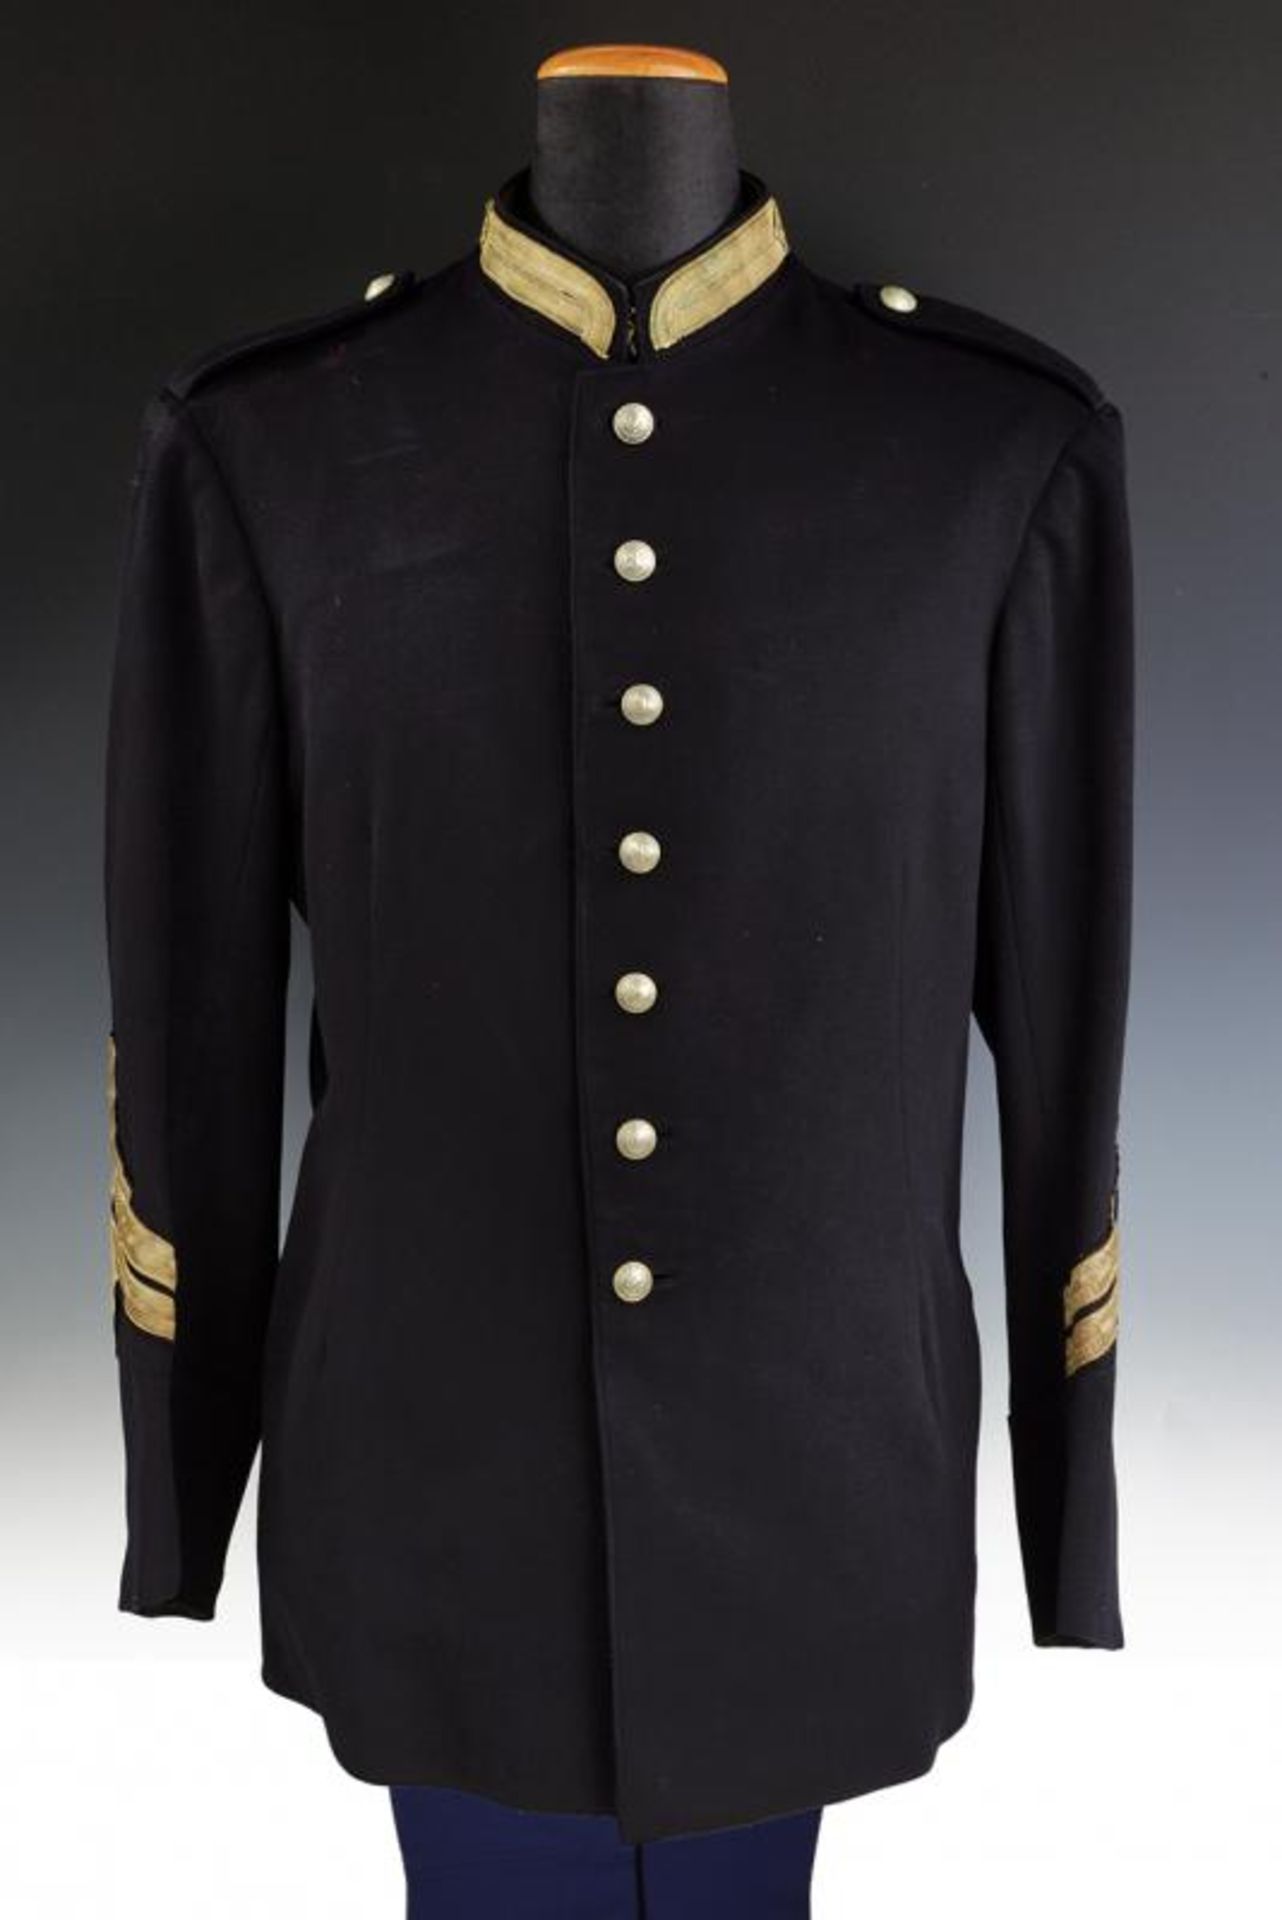 A gendarmerie NC-officer's jacket and trousers